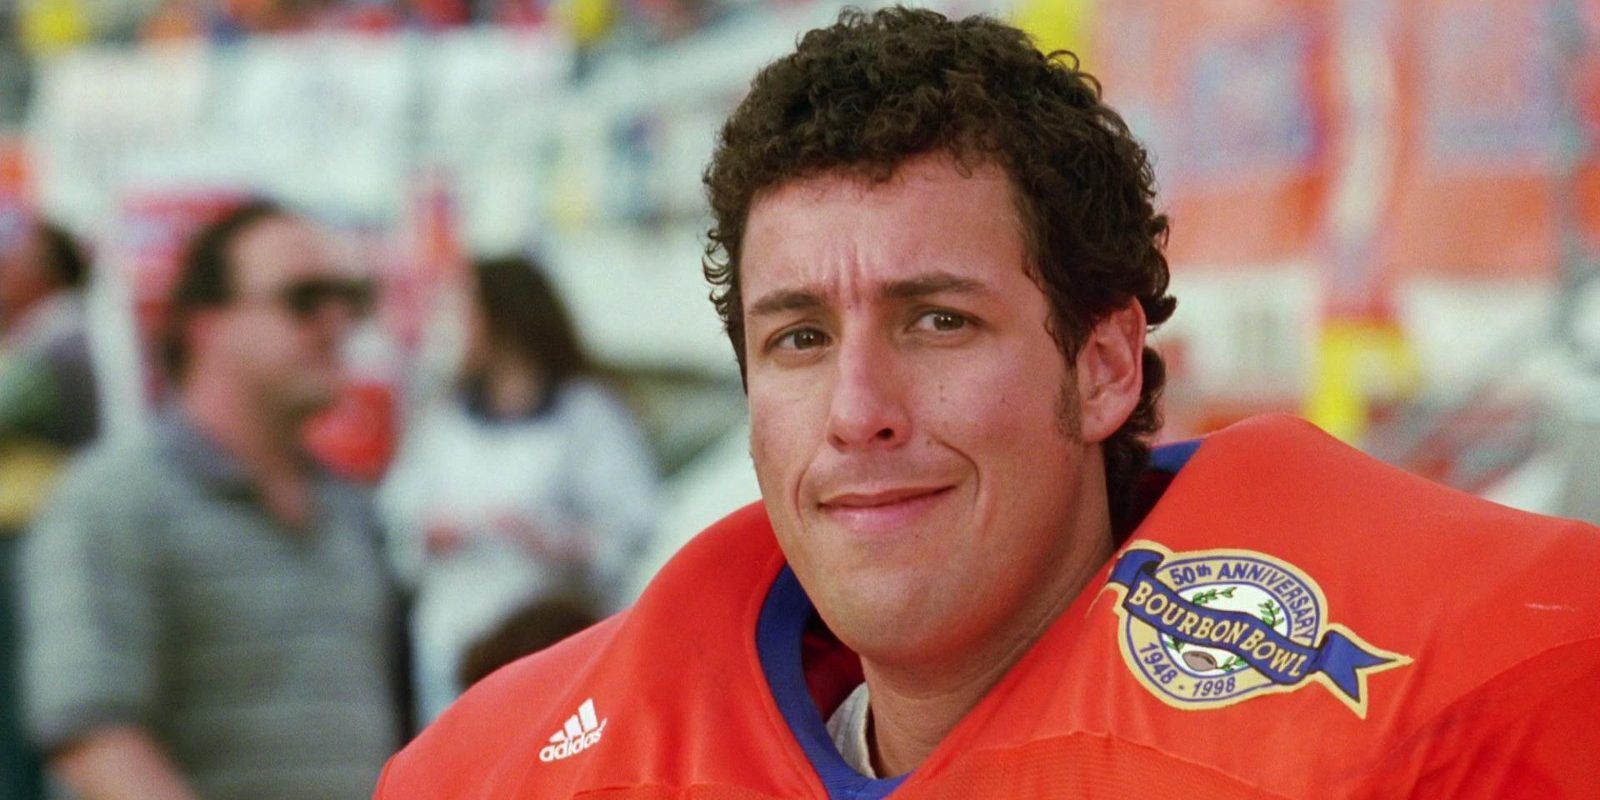 Bobby Boucher Jr in The Waterboy